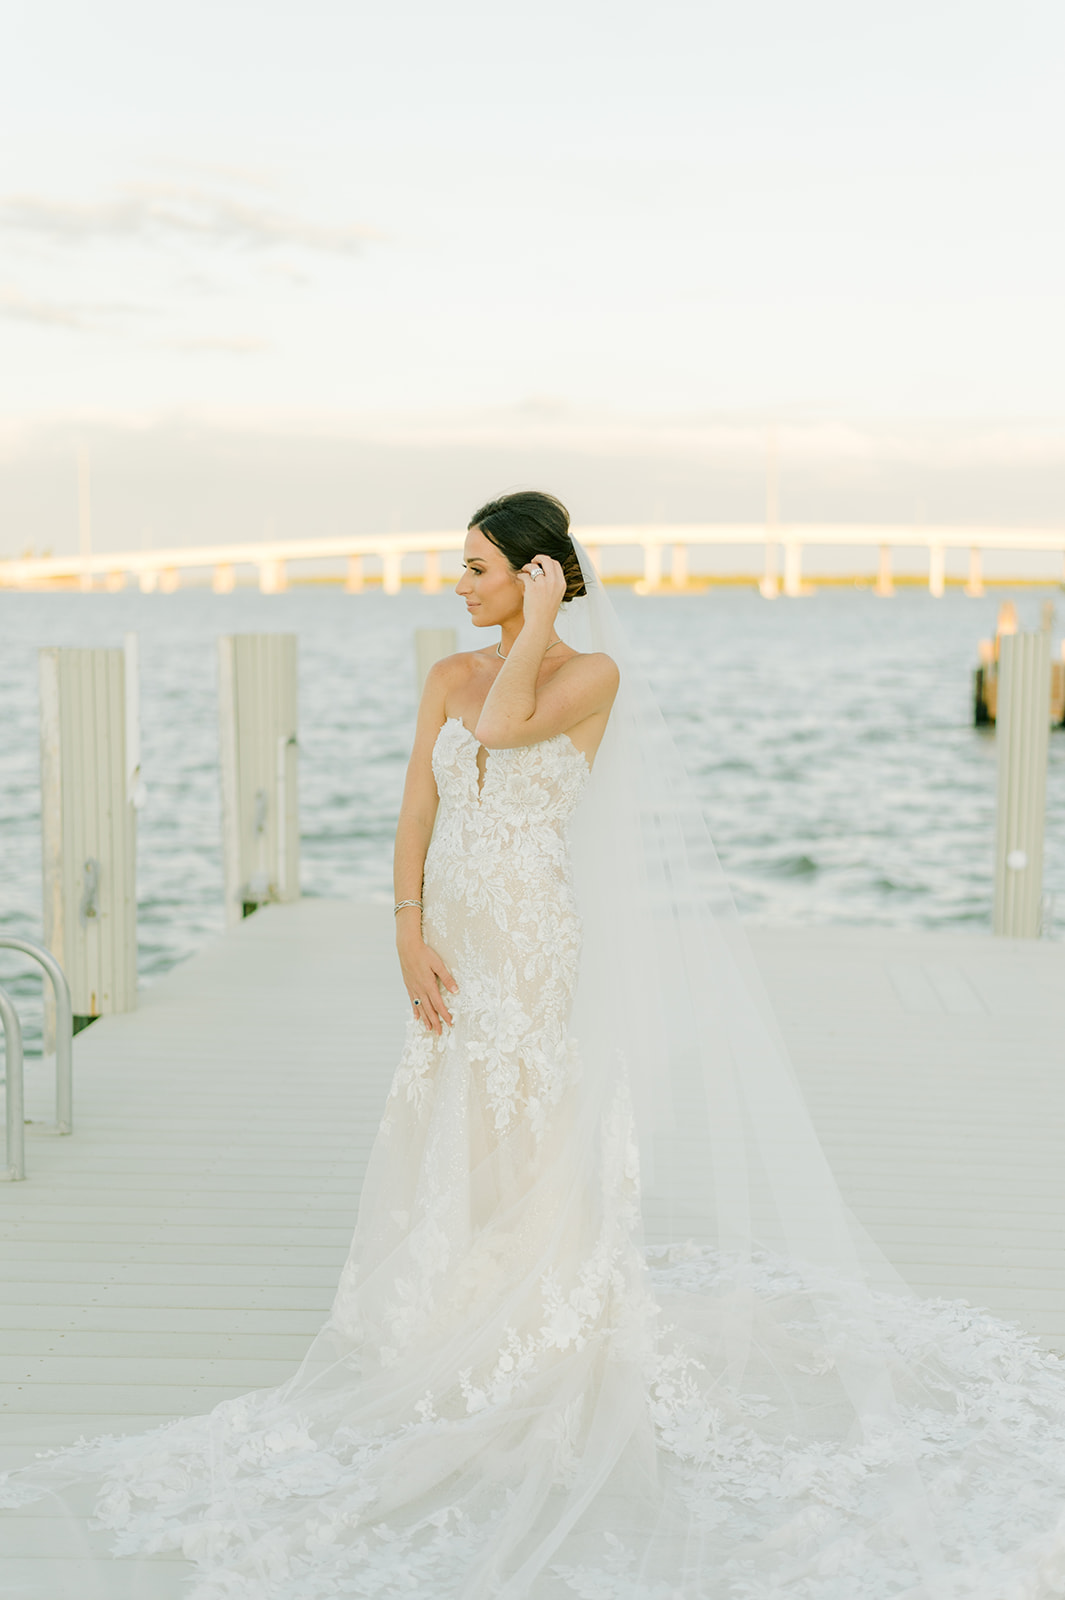 Marco Island Wedding Photography - A Reflection of Your Love and Happiness
